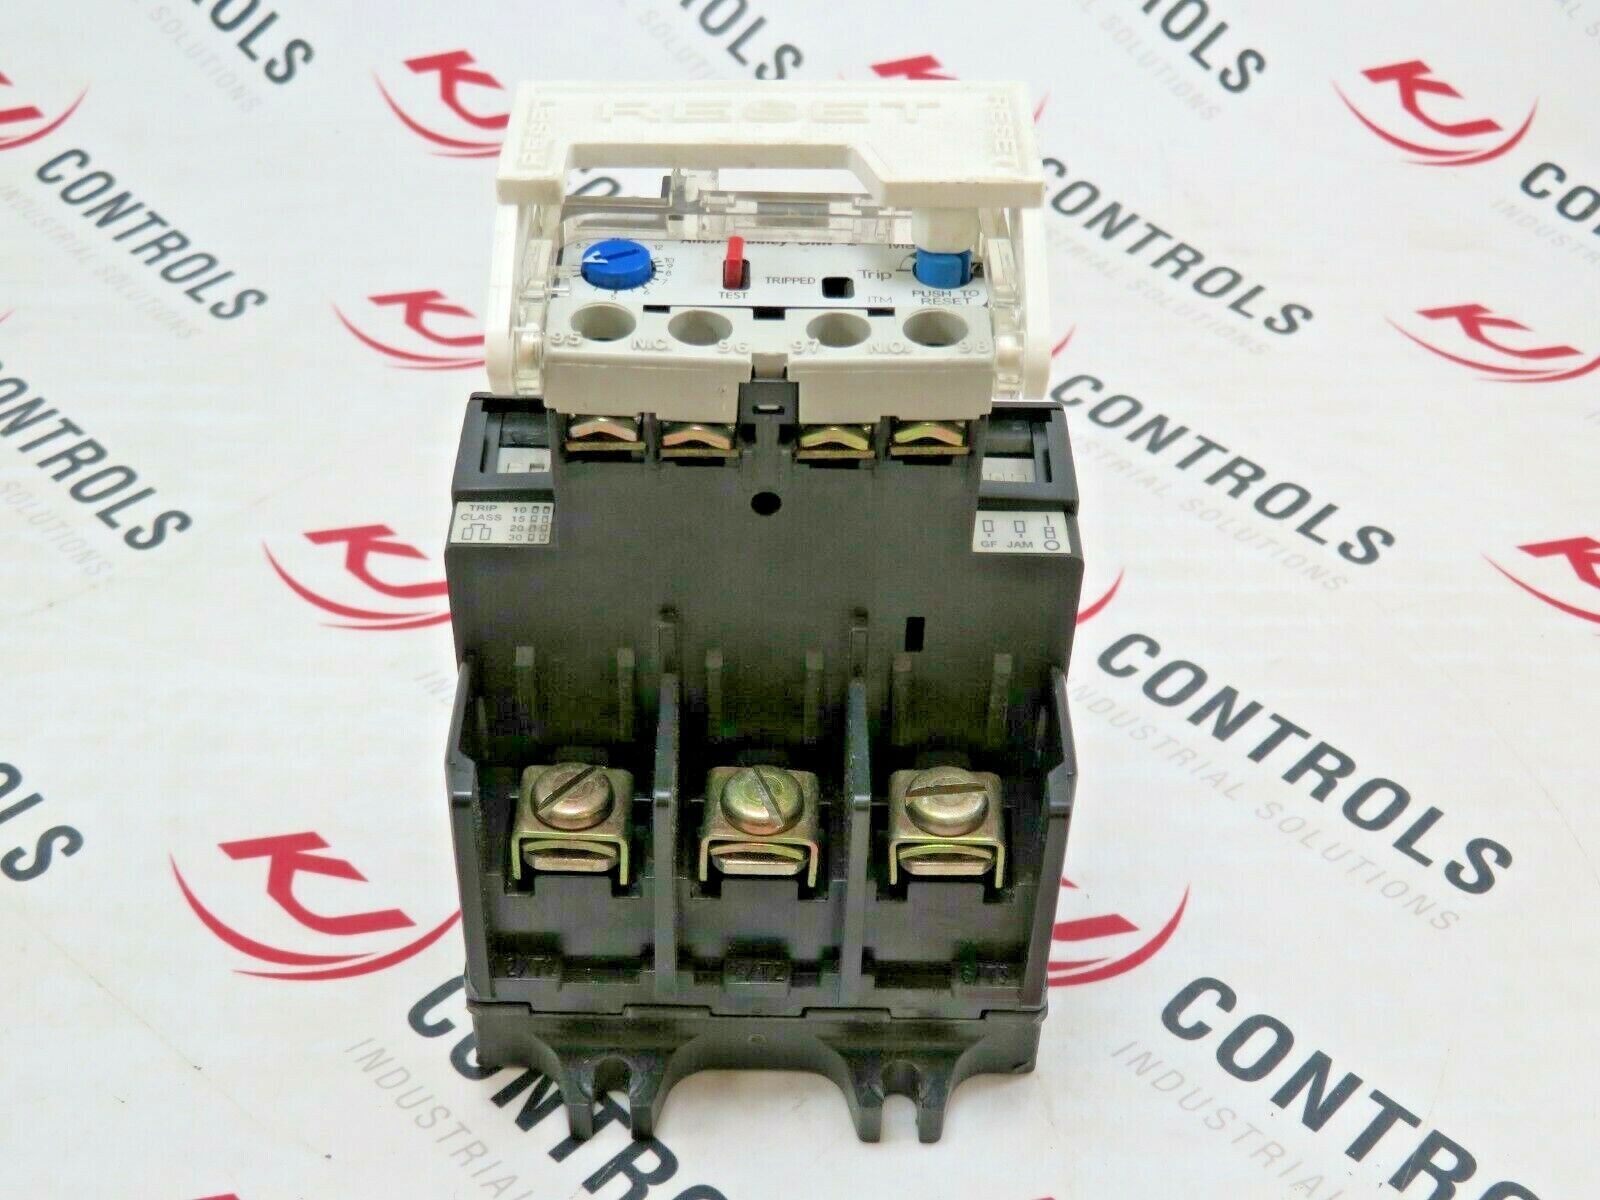 Allen-Bradley 592-B1FA Solid State Overload Relay 3.7-12A